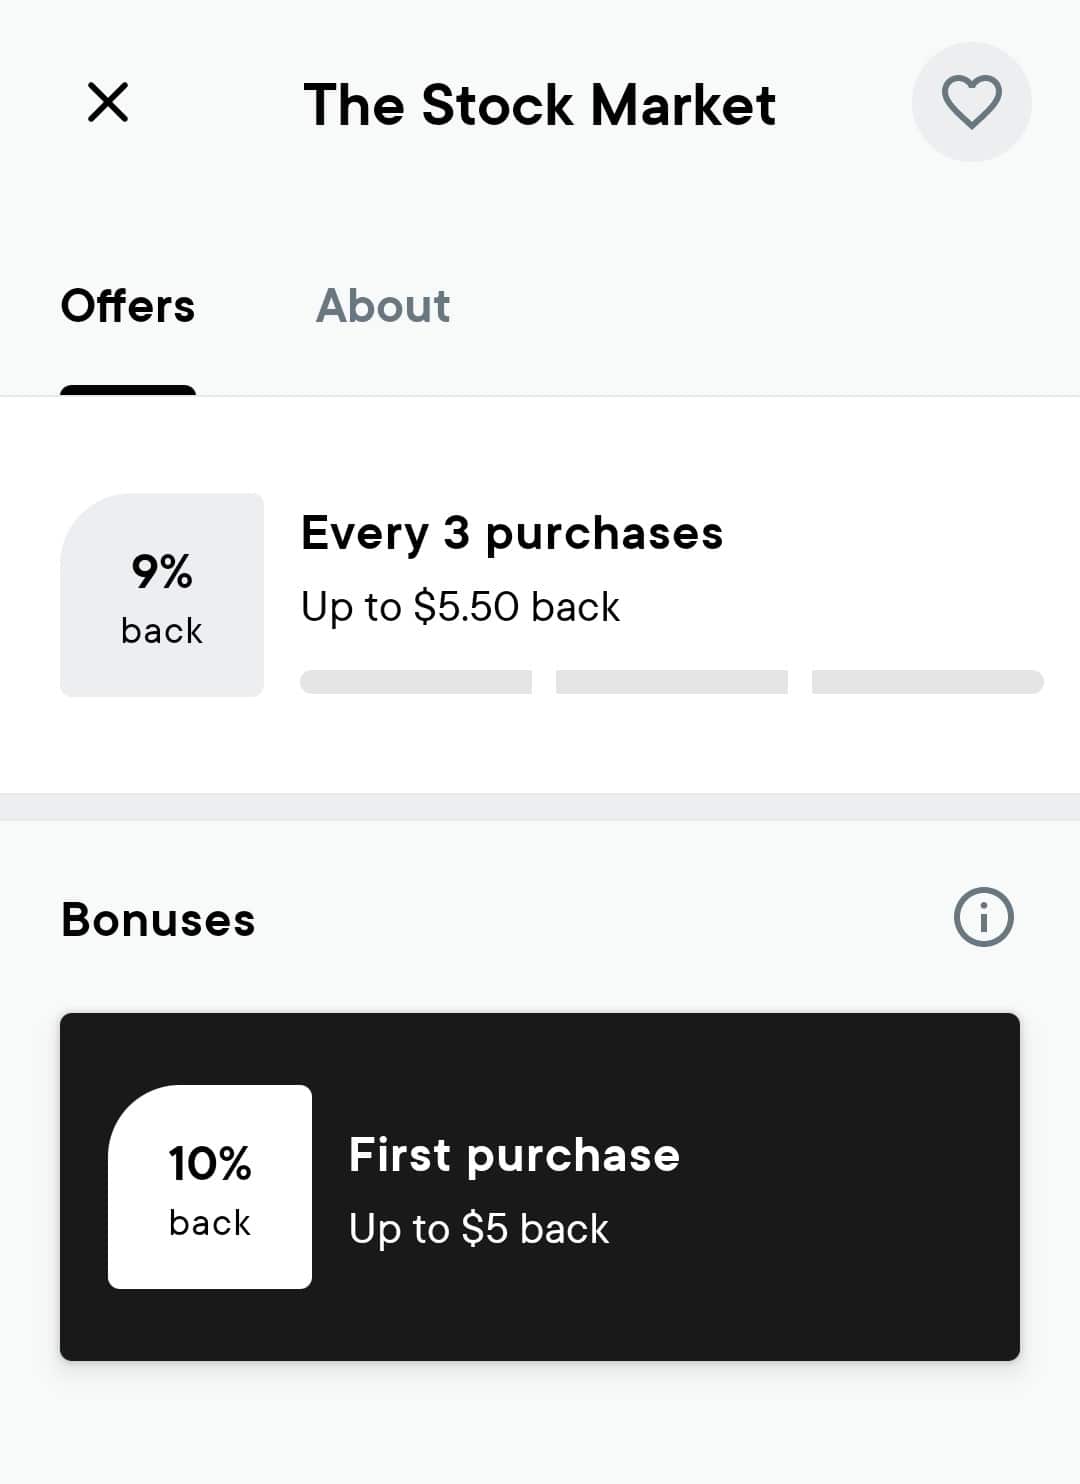 Neo Financial first purchase bonus from The Stock Market 